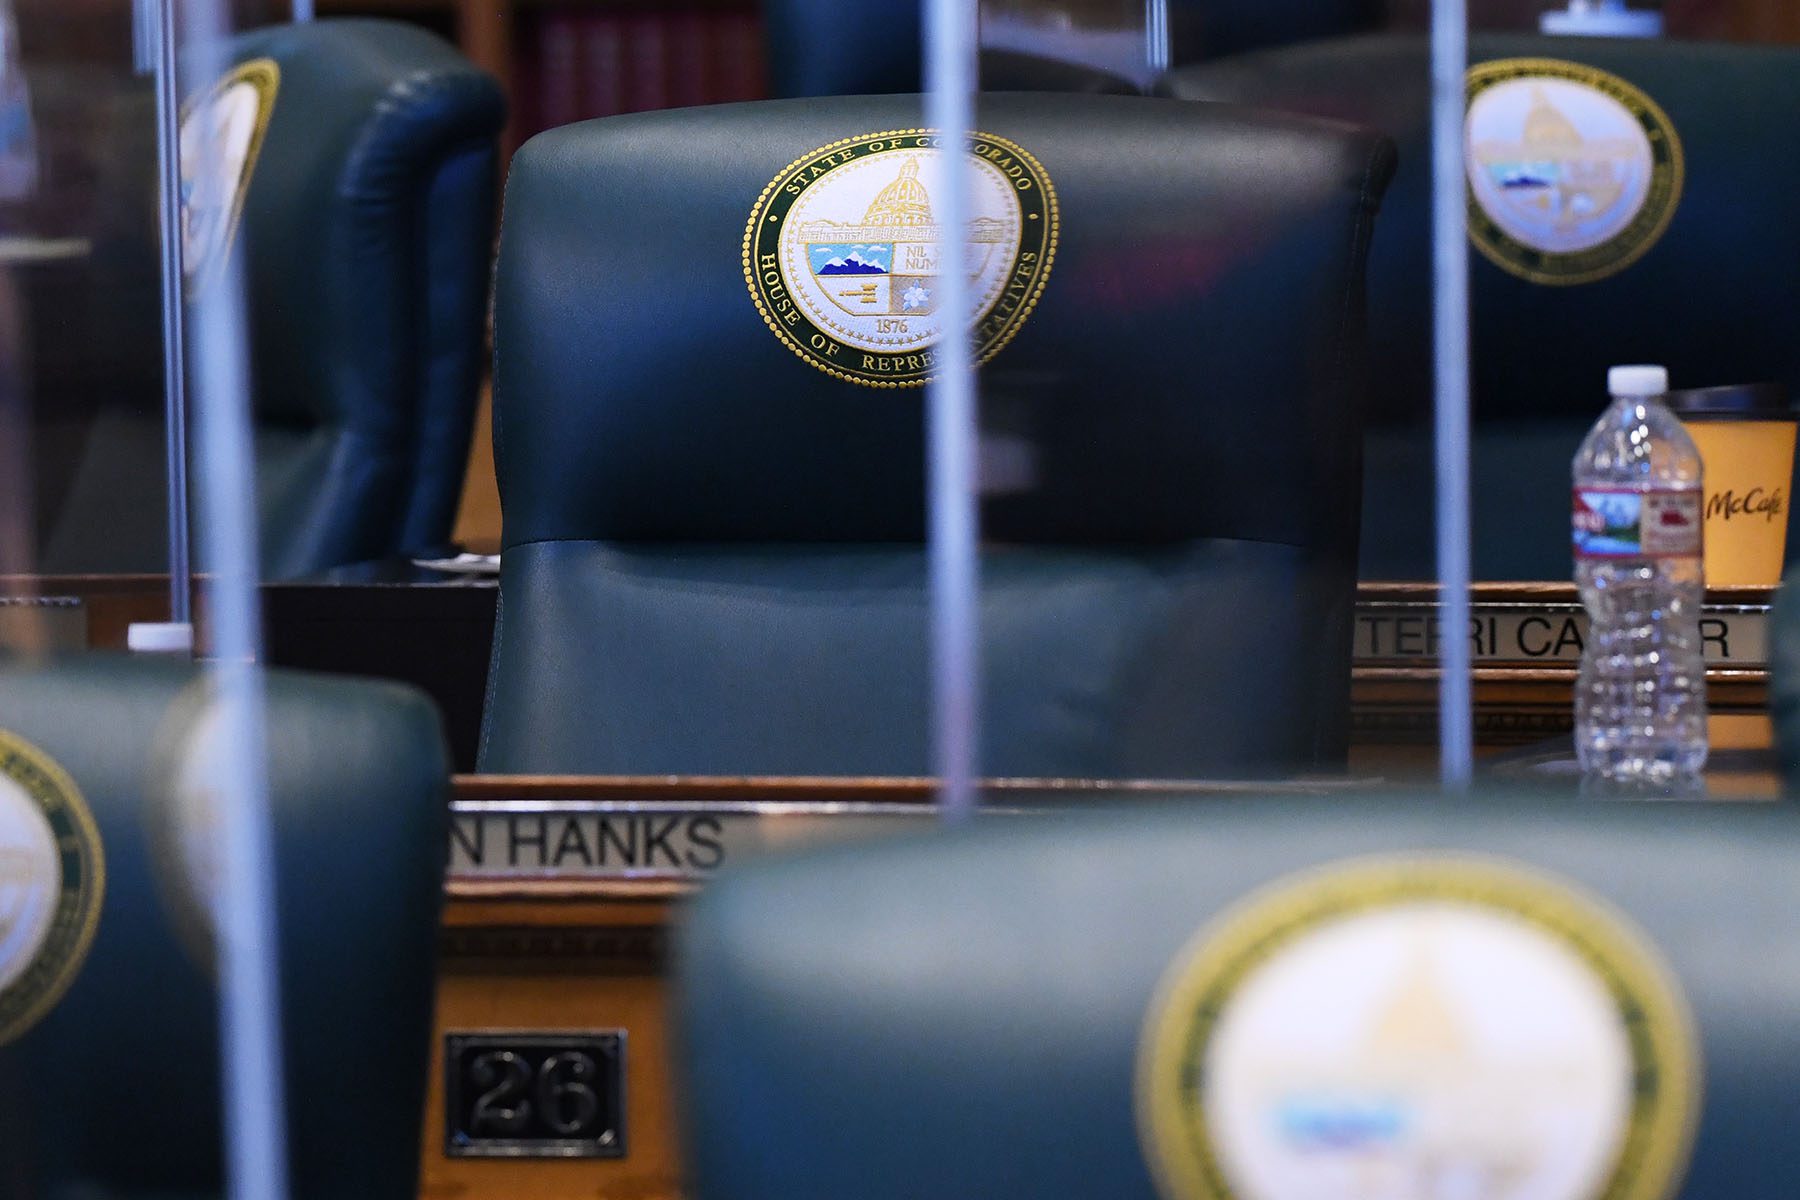 Empty desks and desk chairs are seen at the Colorado State Capitol. The chair are engraved with a "State of Colorado, House of Representatives" emblem.